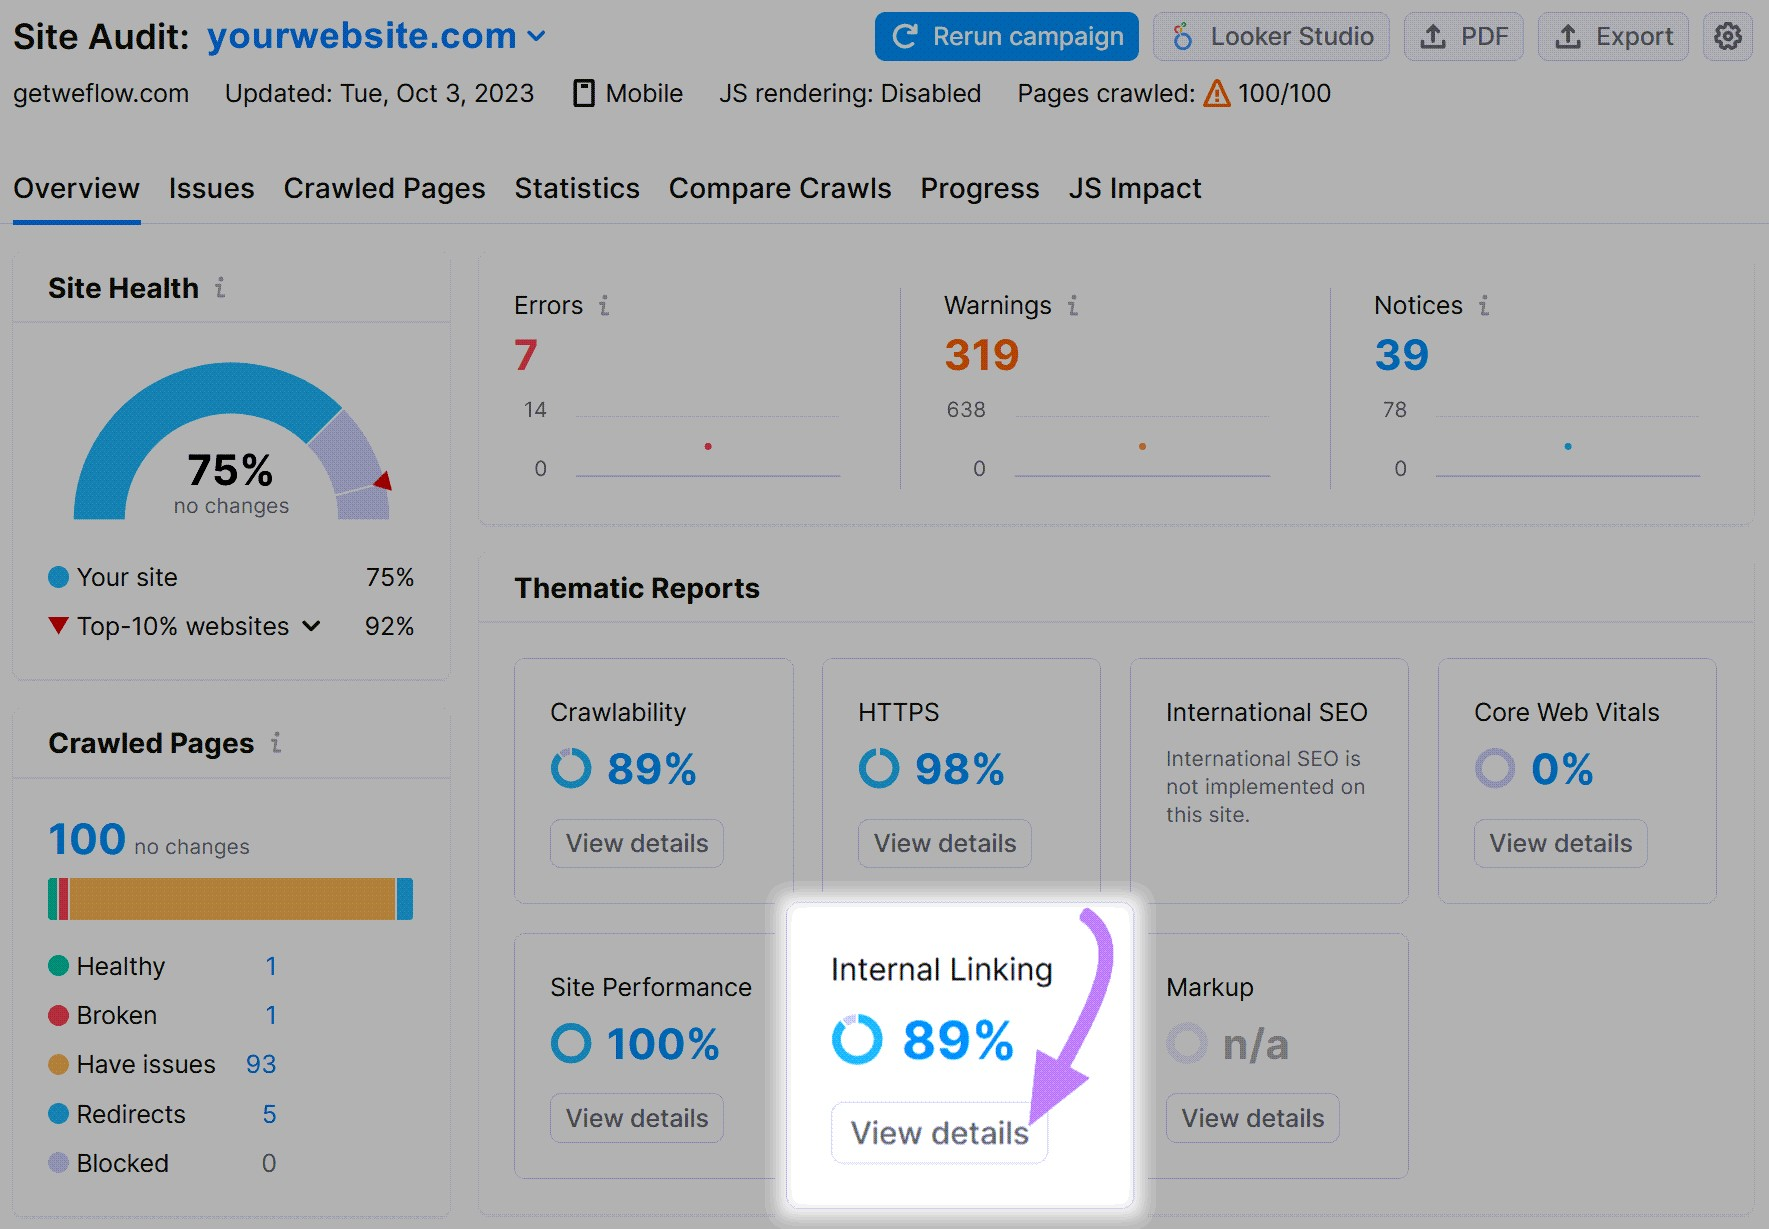 “Internal linking” widget highlighted in the Site Audit overview report